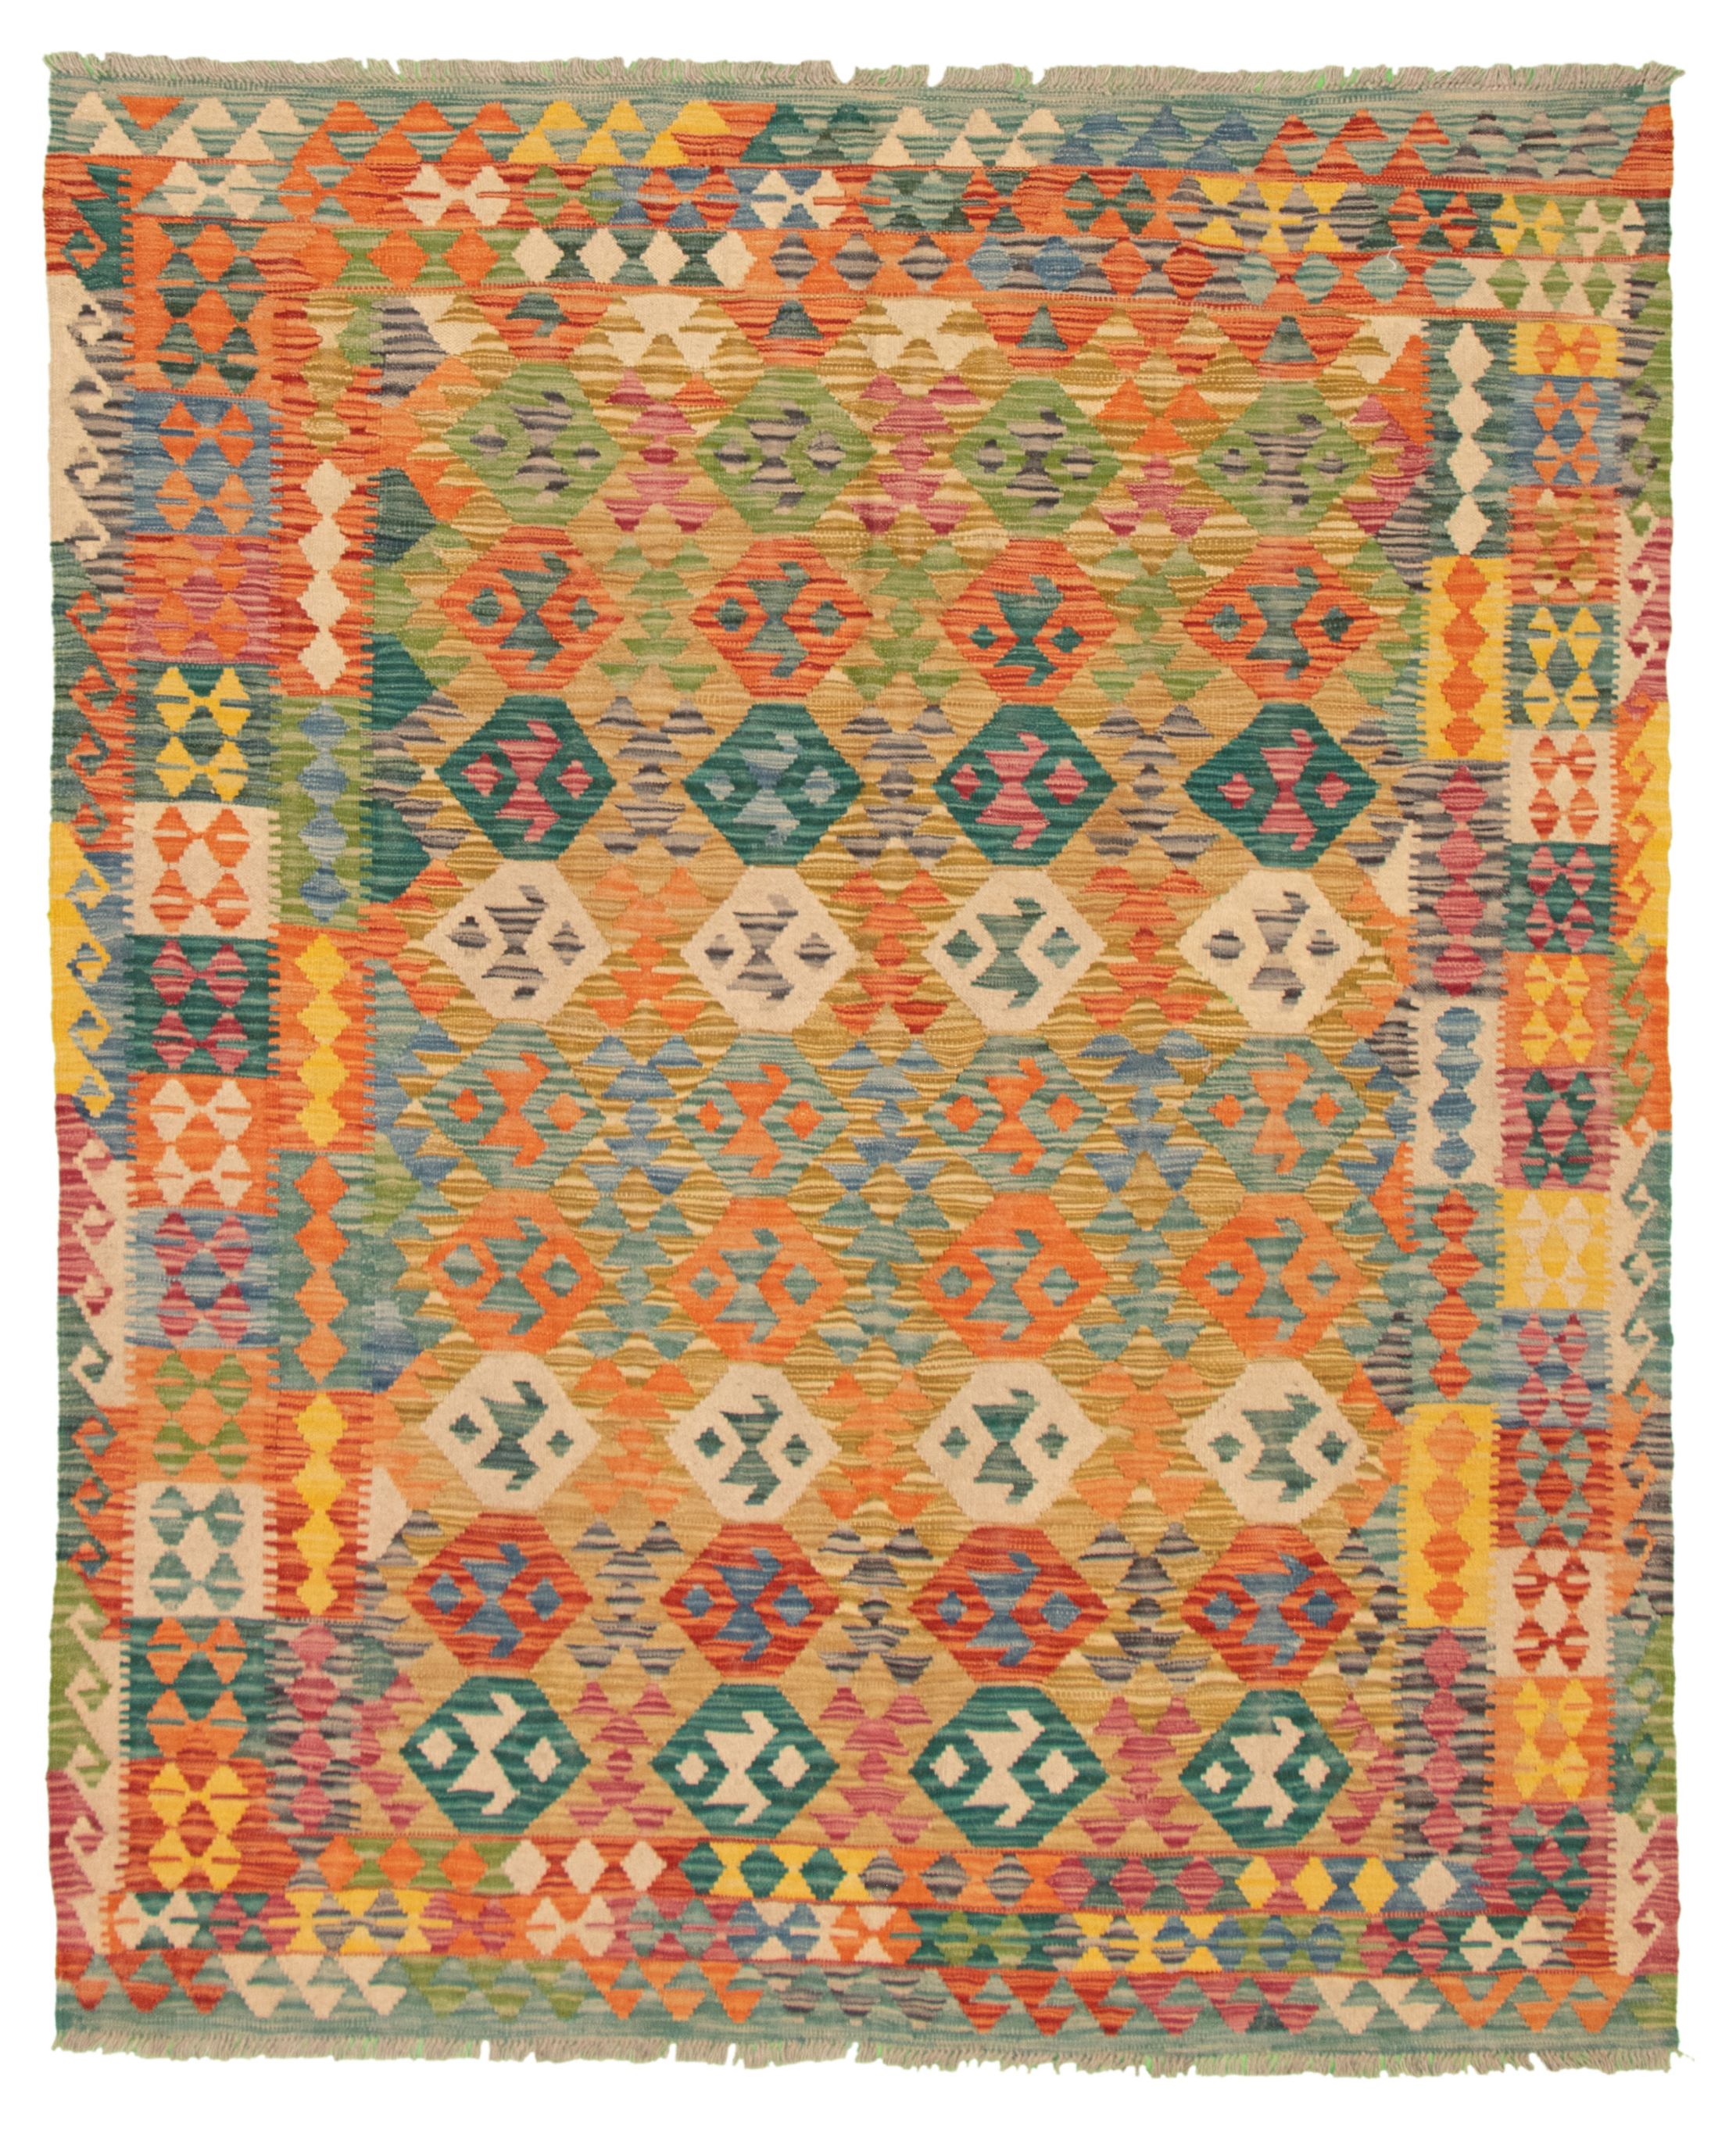 Hand woven Bold and Colorful  Multi Color Wool Kilim 6'3" x 7'10" Size: 6'3" x 7'10"  